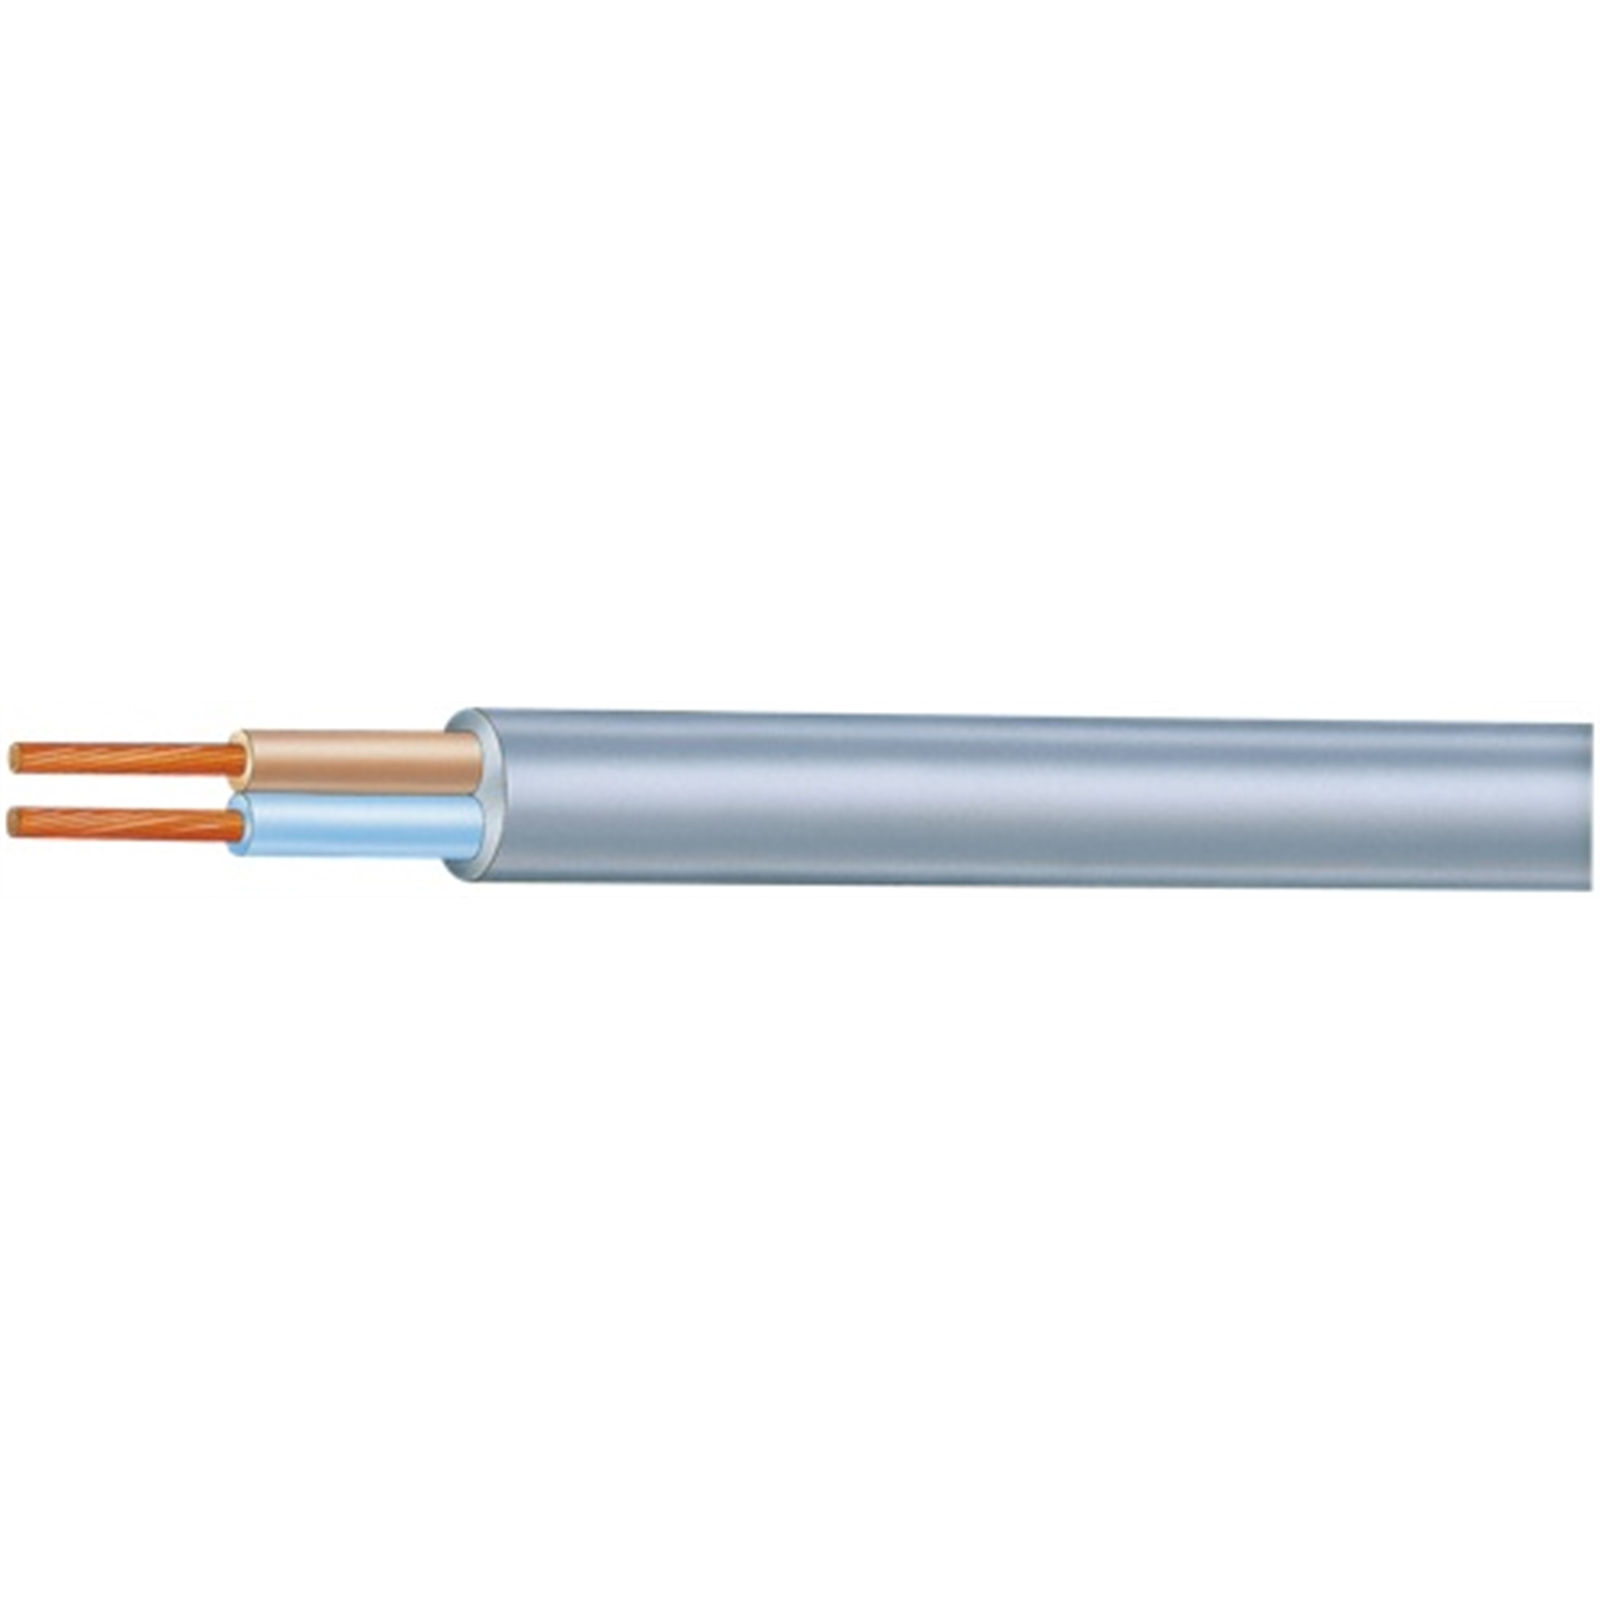 Olex 100m 24/0.20mm Grey 2 Core Electrical Cable